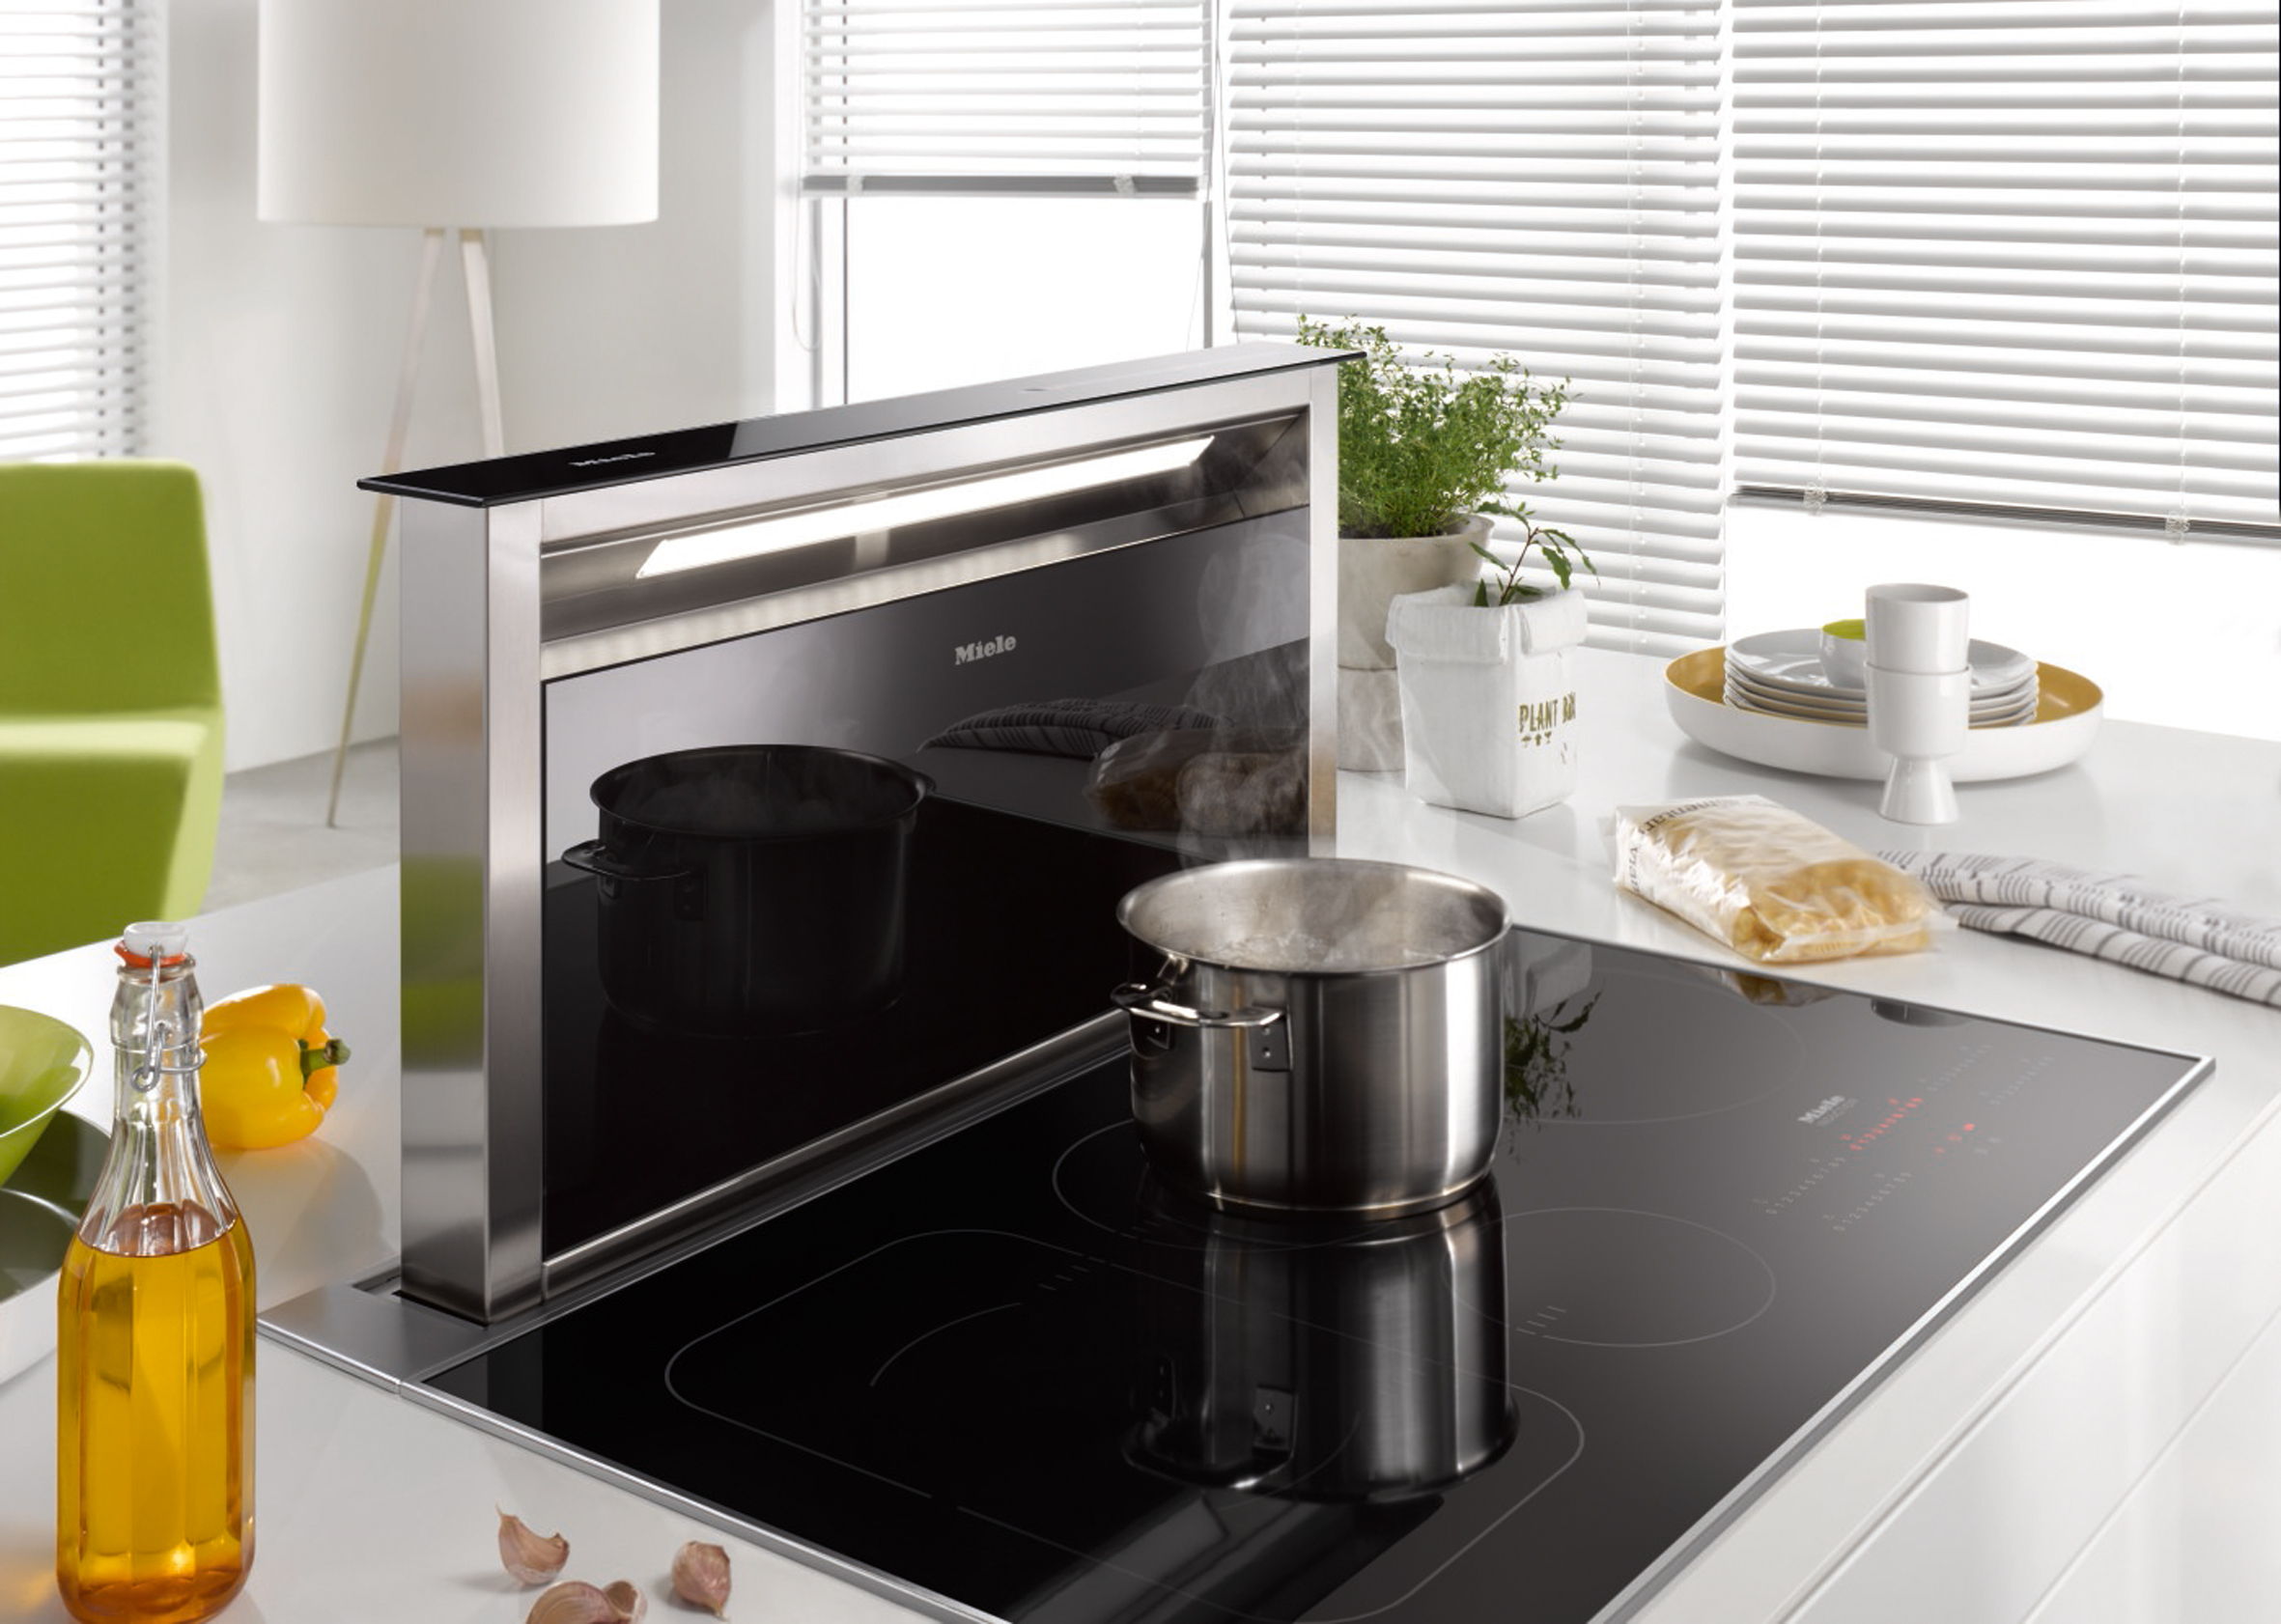 Miele 5 questions before choosing appliances downdraft extractor